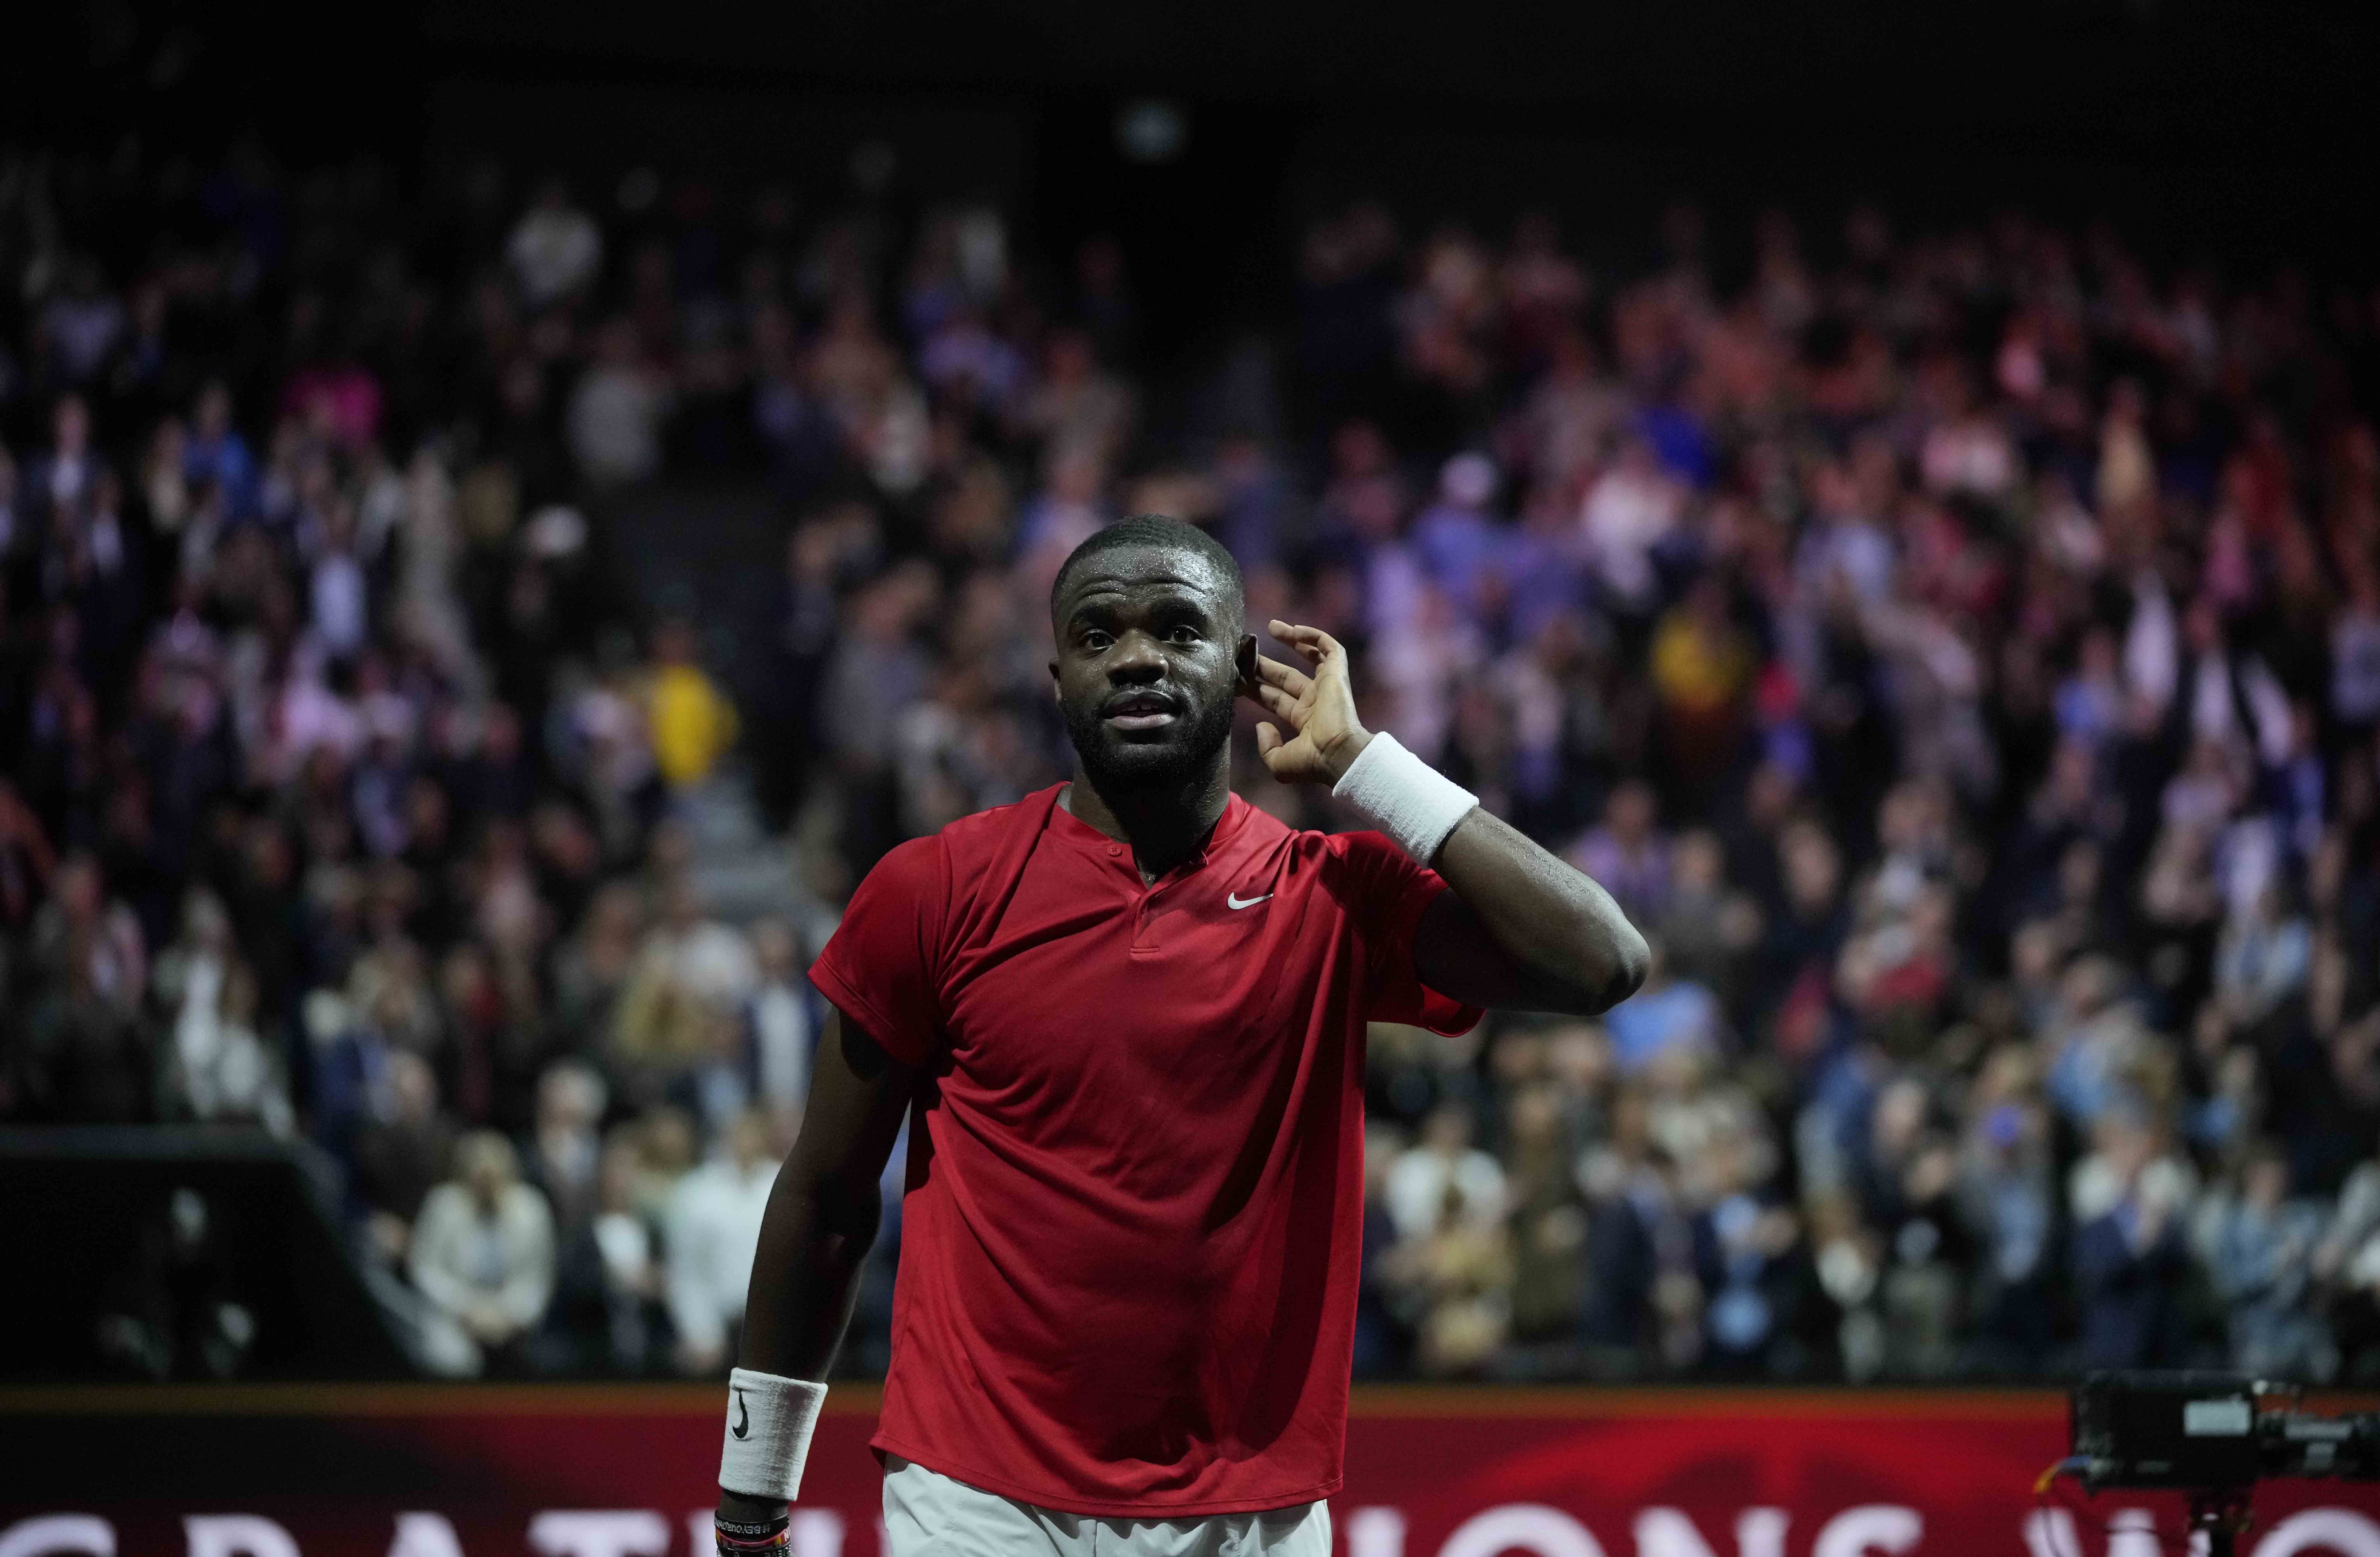 ‘Prime Time’ Tiafoe lifts Team World to 1st Laver Cup win